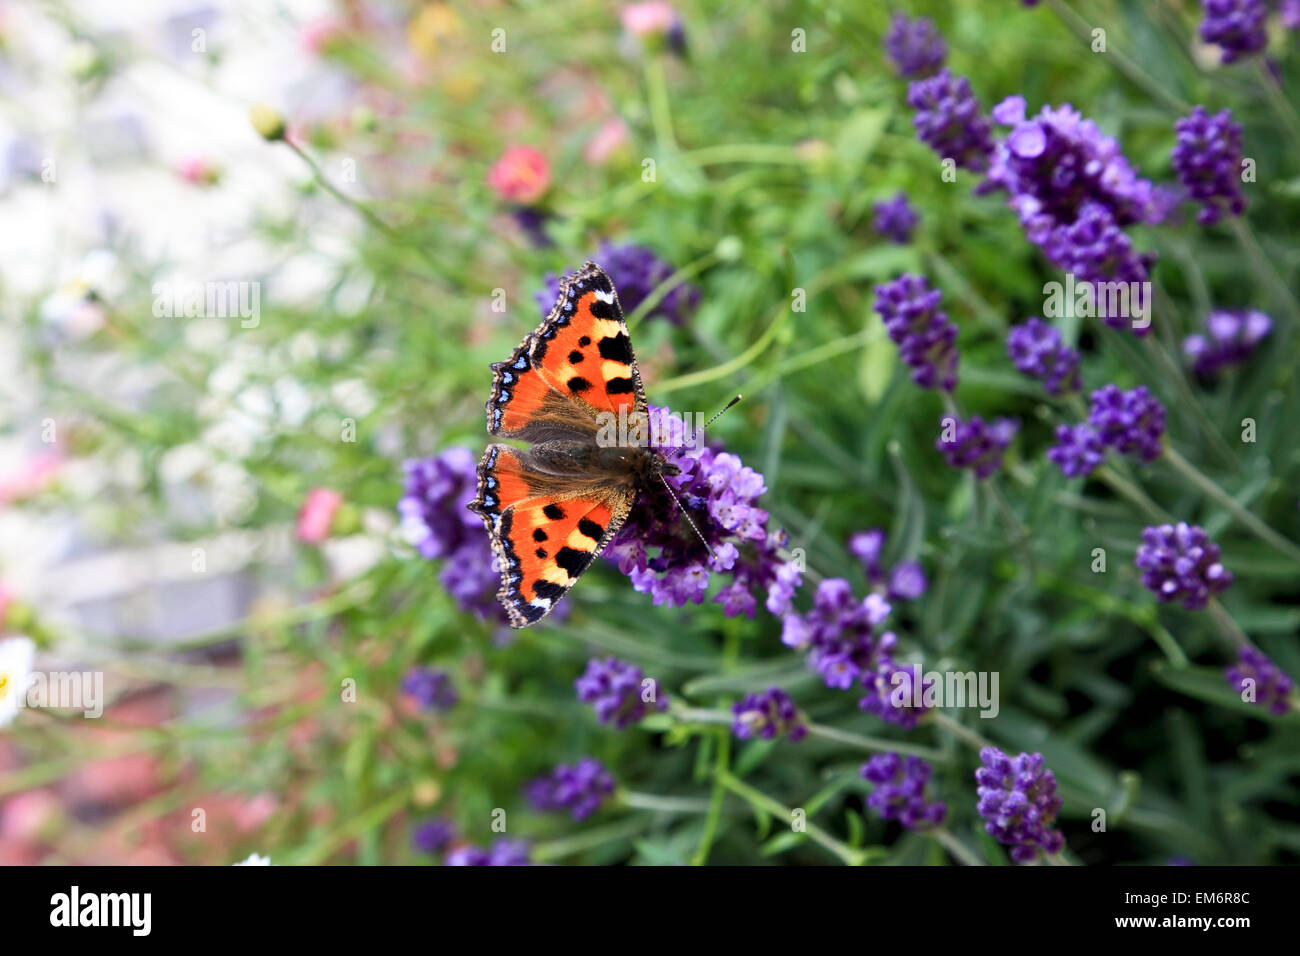 RS 4900. Small Tortoiseshell Butterfly on Lavender, Kent, England Stock Photo